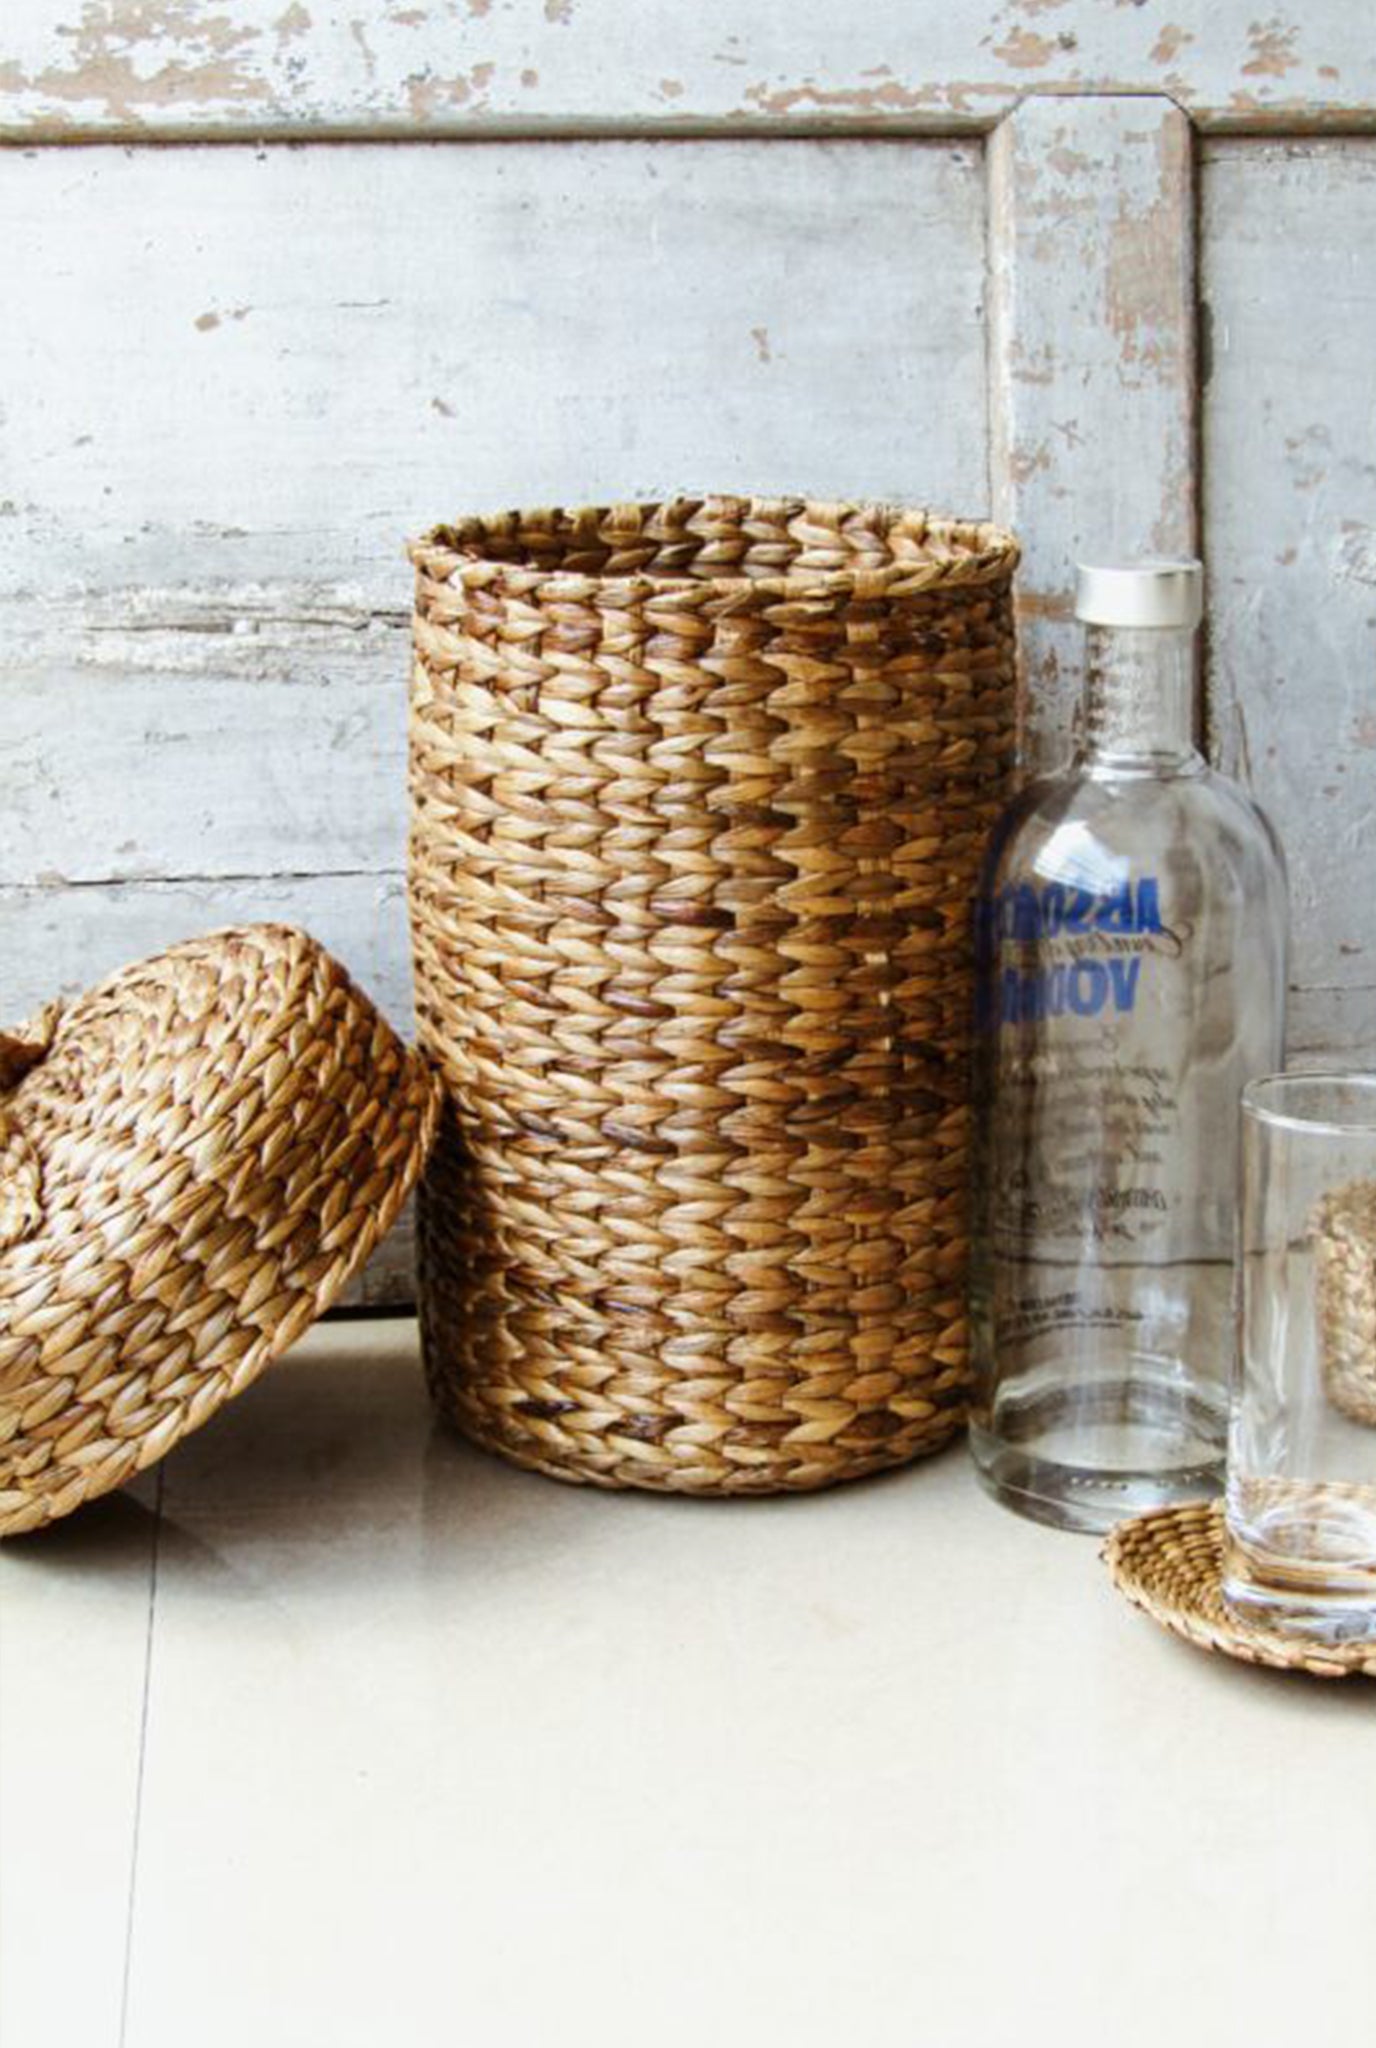 handcrafted-basket-water hyacinth- sustainable-eco friendly-jodi